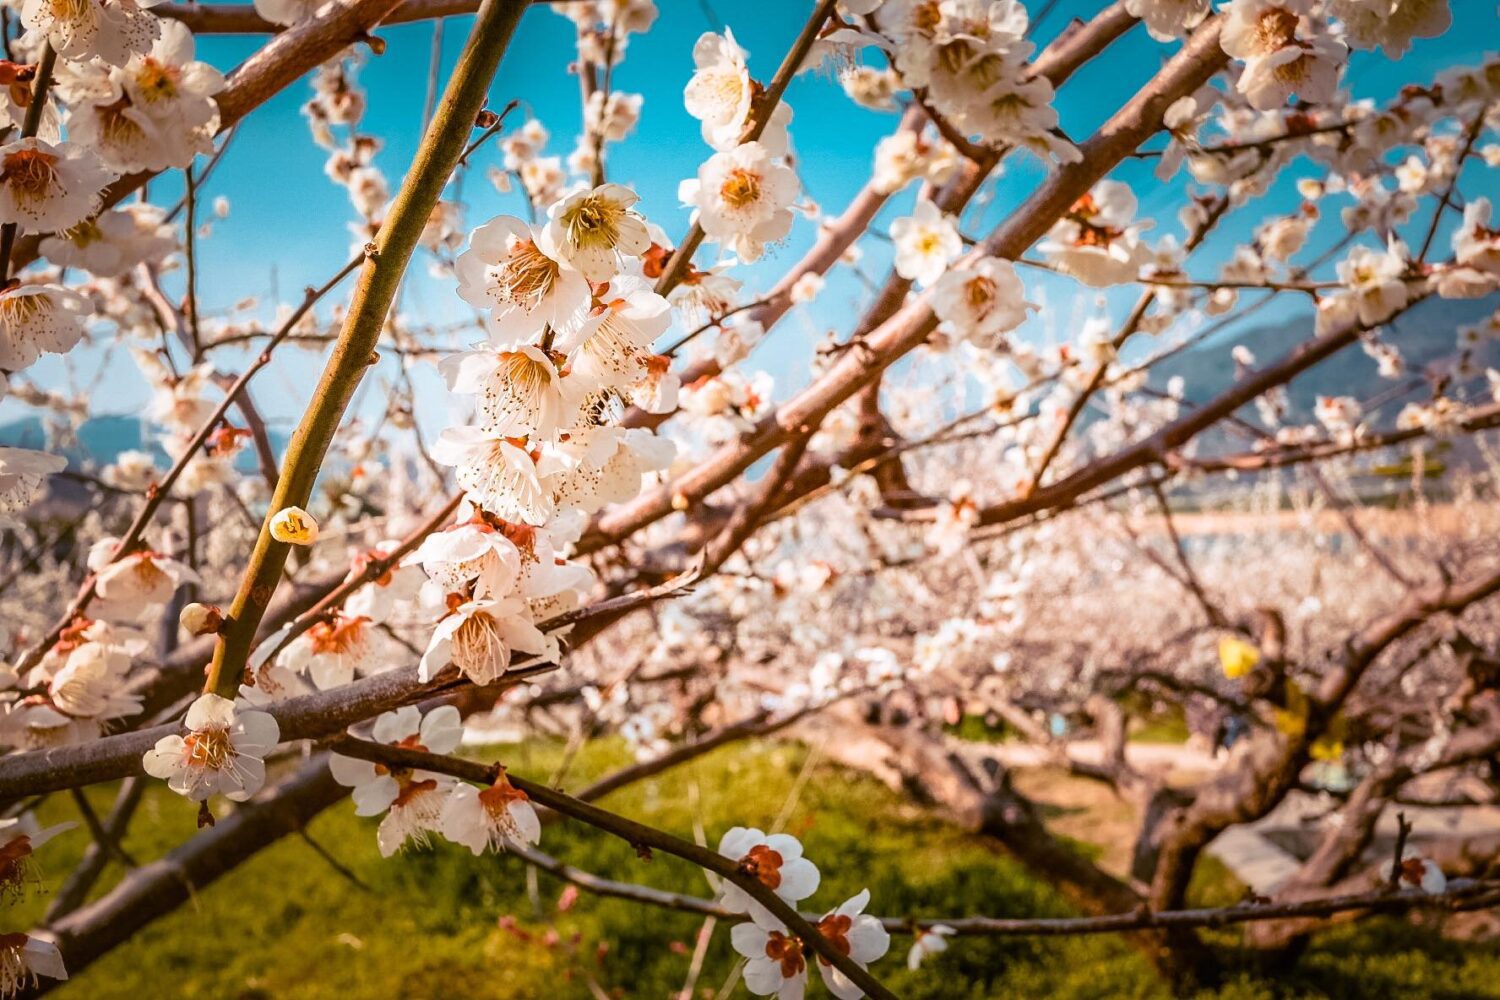 gwangyang maehwa festival | plum blosssoms in early spring